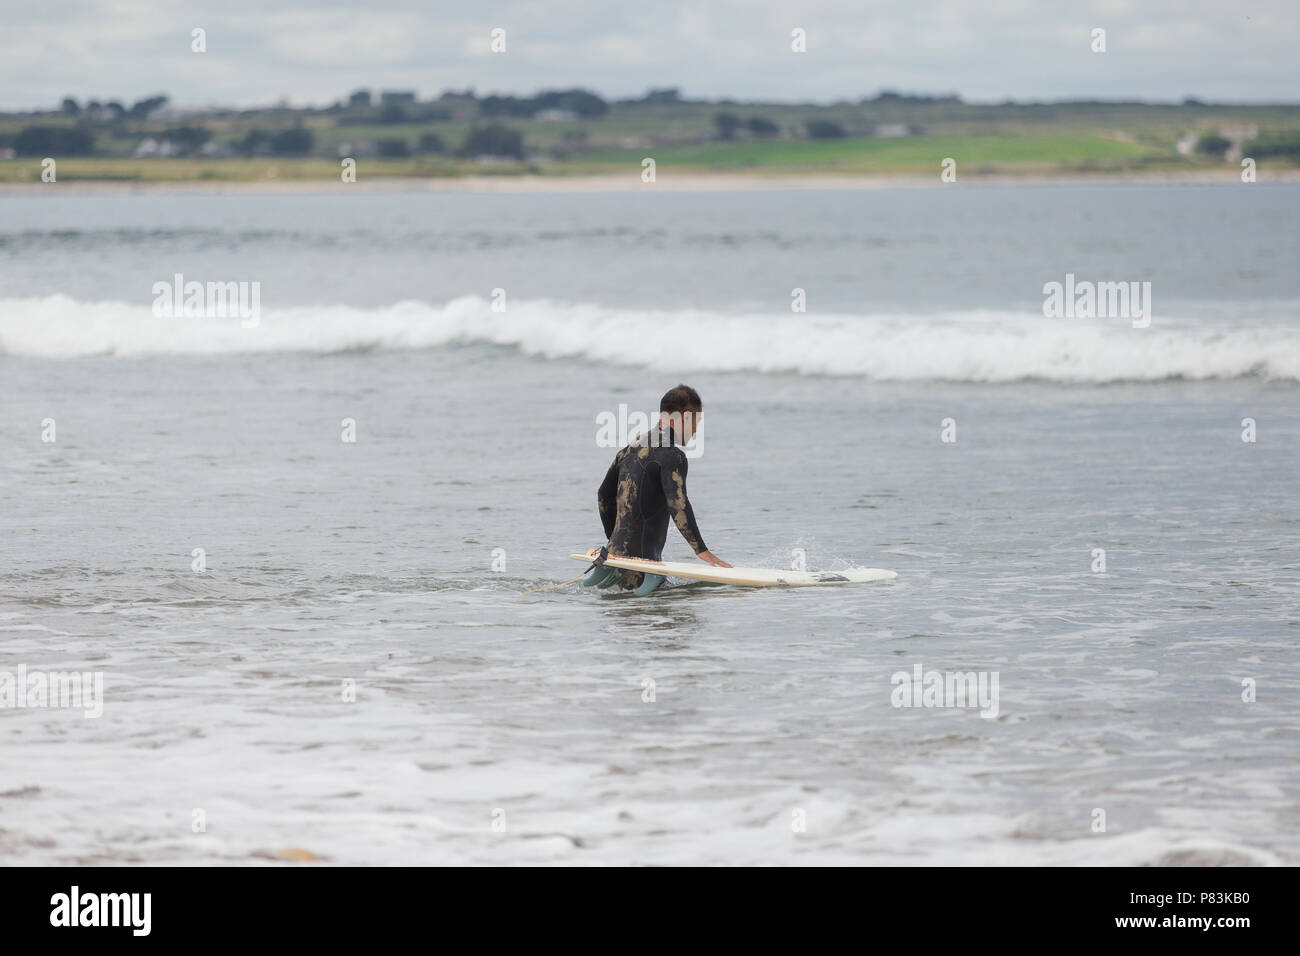 Strandhill, Sligo, Ireland. 8th July, 2018. Surfers enjoying the great weather and Atlantic waves surfing in Strandhill in county Sligo - one of the best places in Europe to surf. Credit: Michael Grubka/Alamy Live News Stock Photo